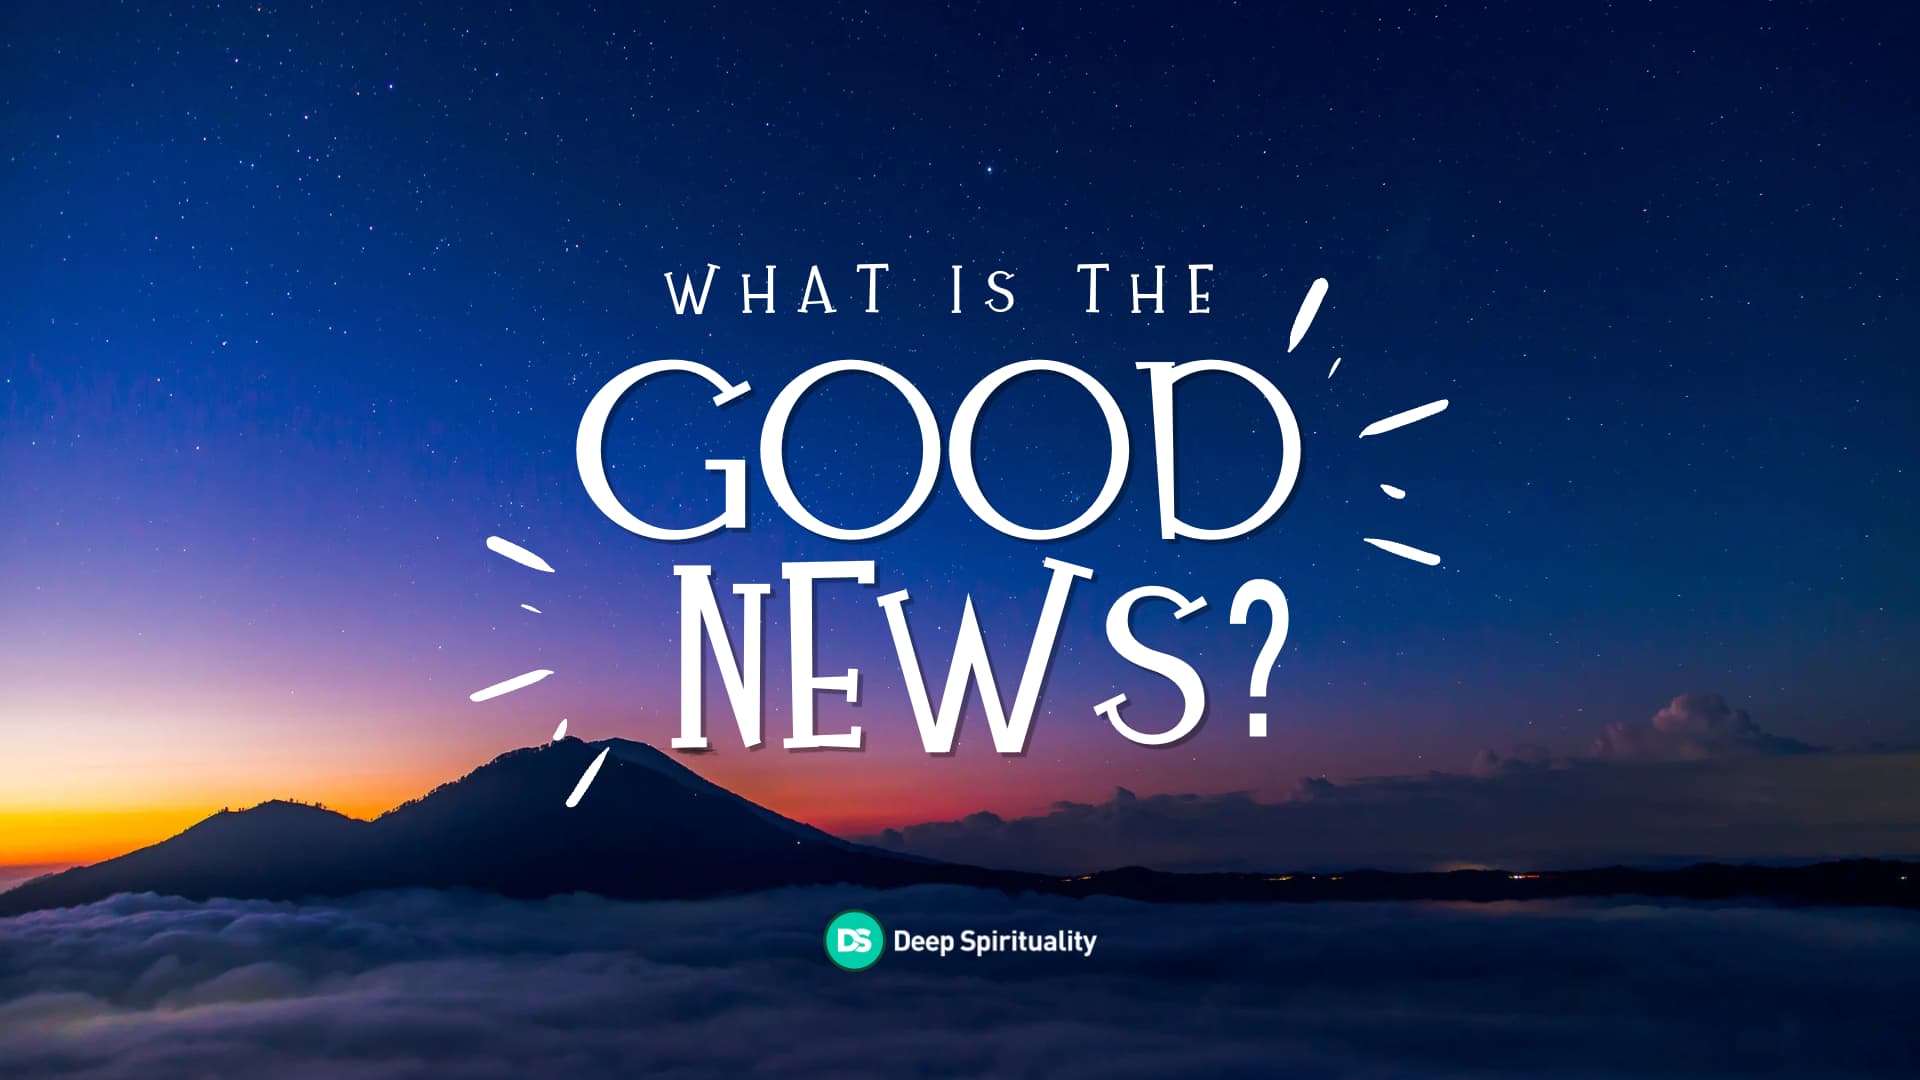 What is the Good News? 7